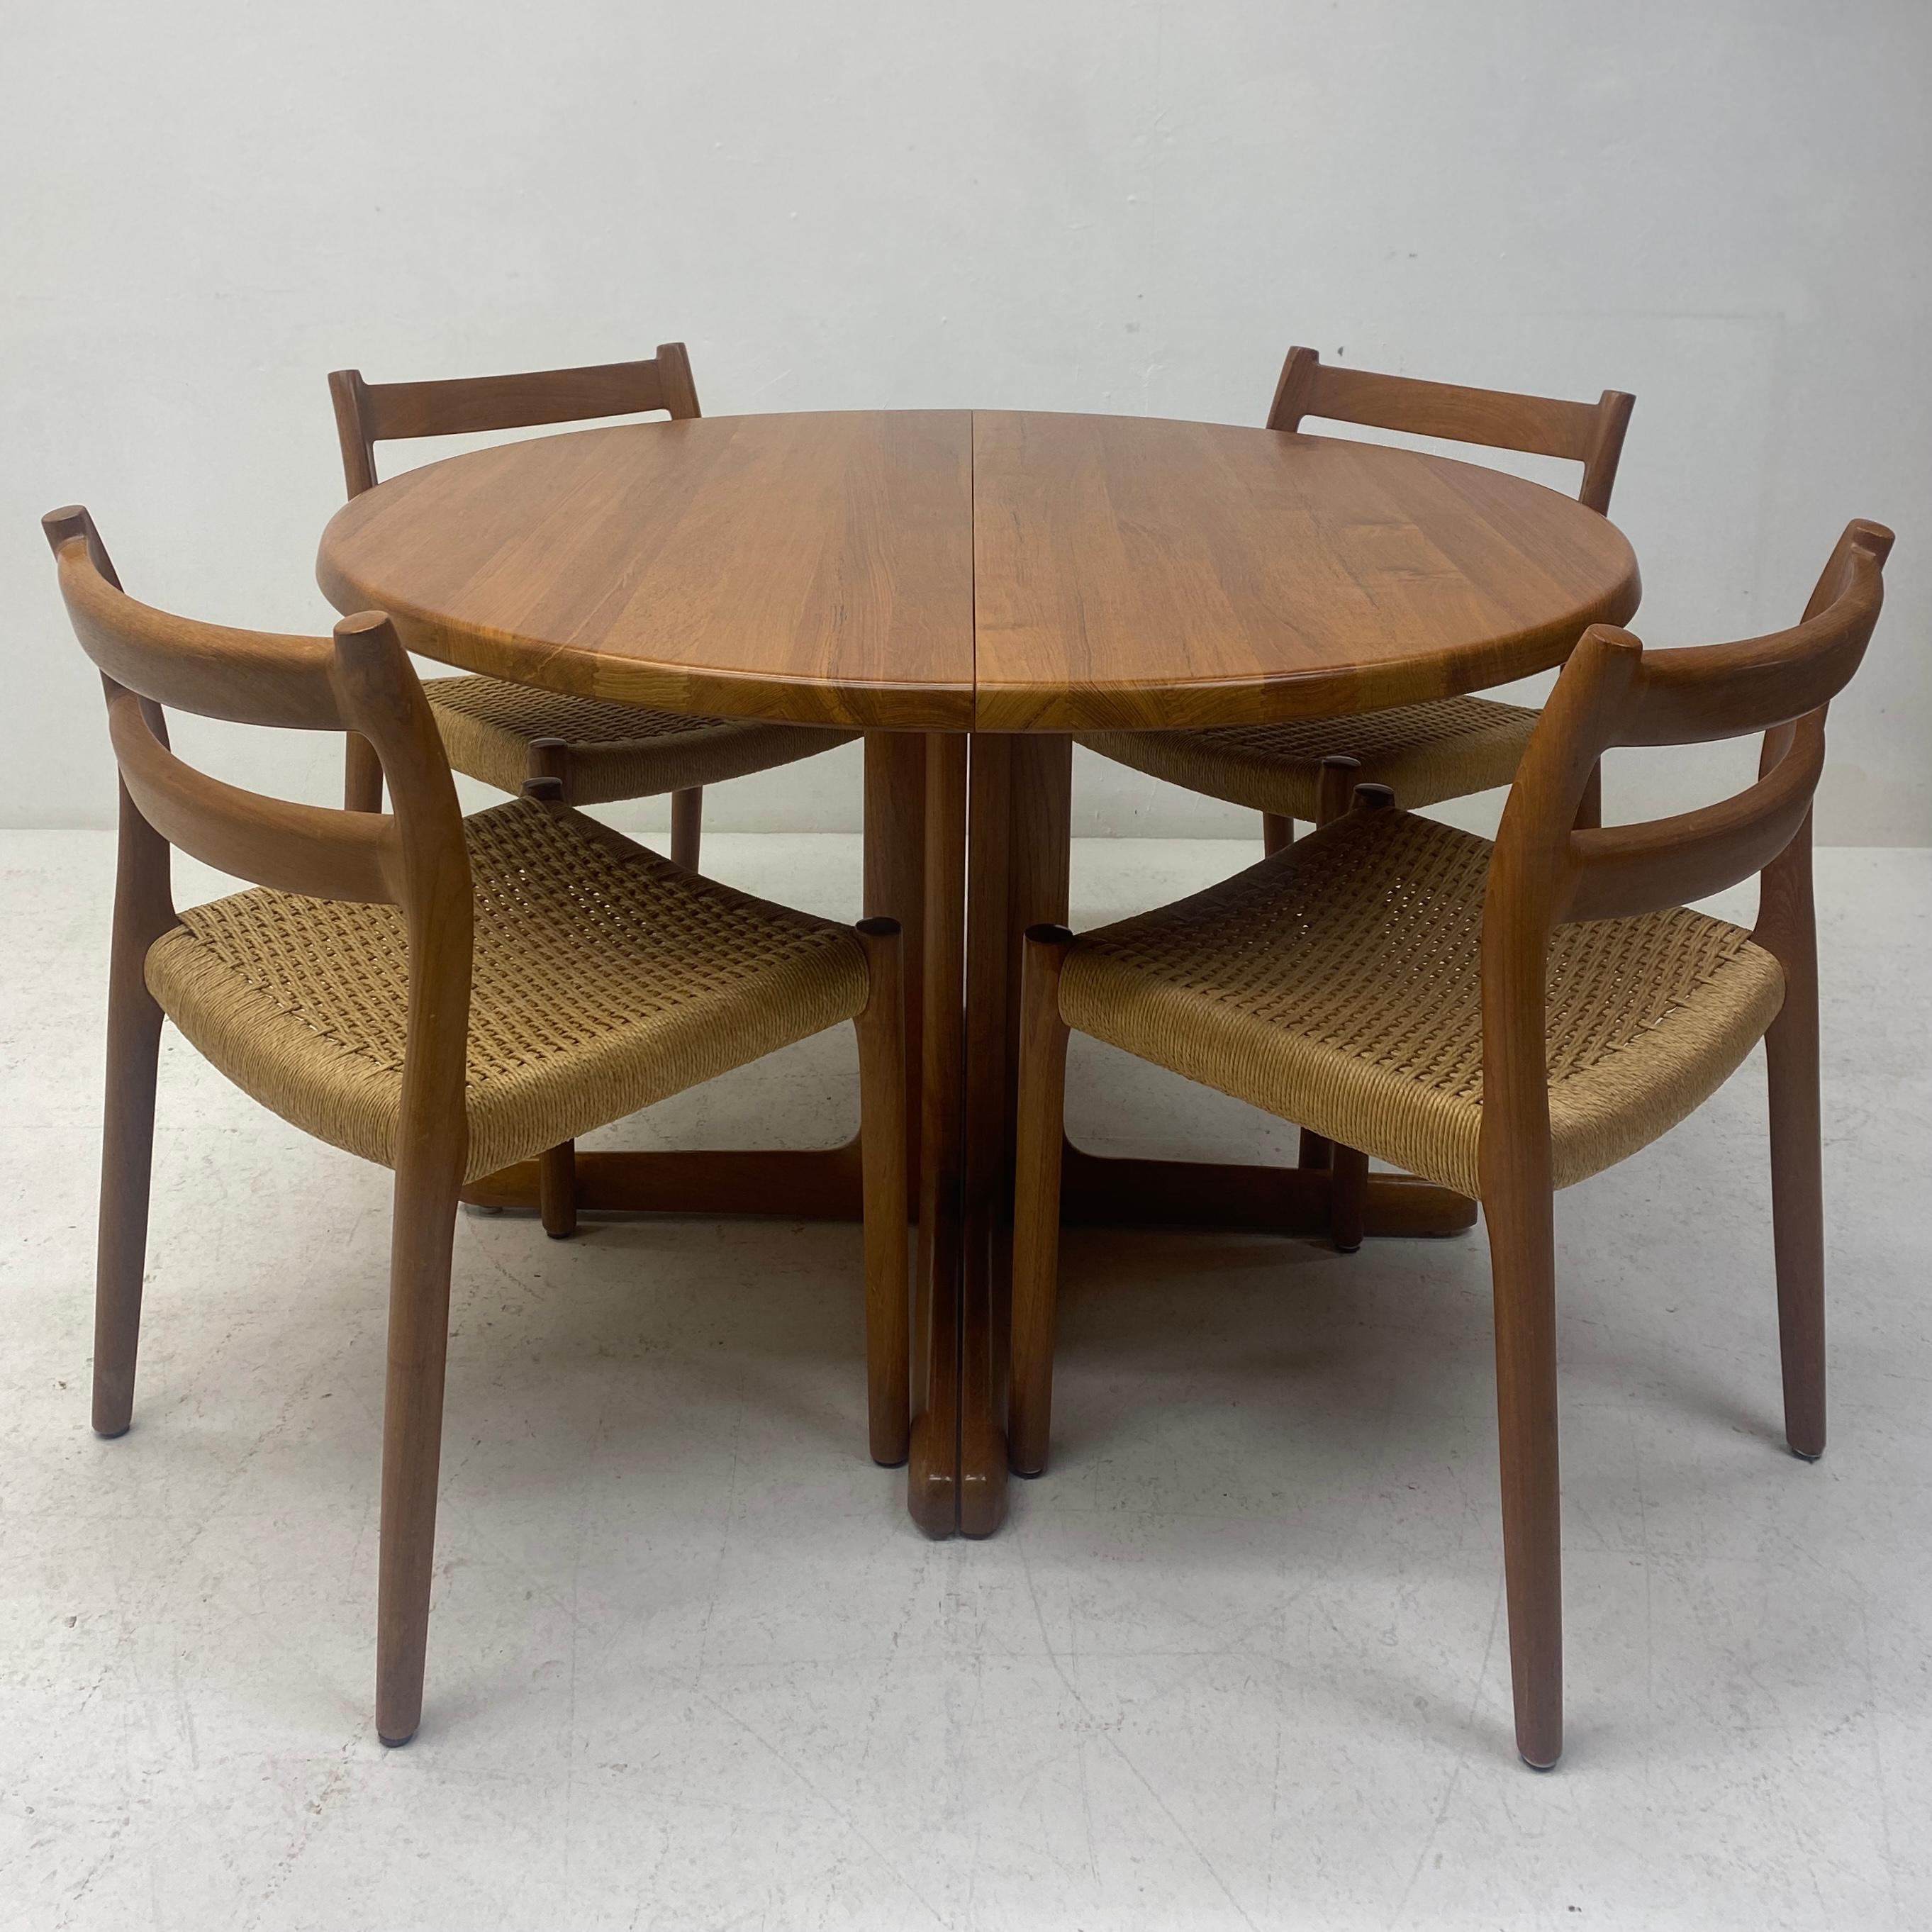 This is a stunning Danish dining table designed by Niels Moller in teak. Niels Moller earned a reputation for consistent excellence in quality & workmanship. The dining table is a beautiful colour, has a lovely grain & was produced in 1960-69. The